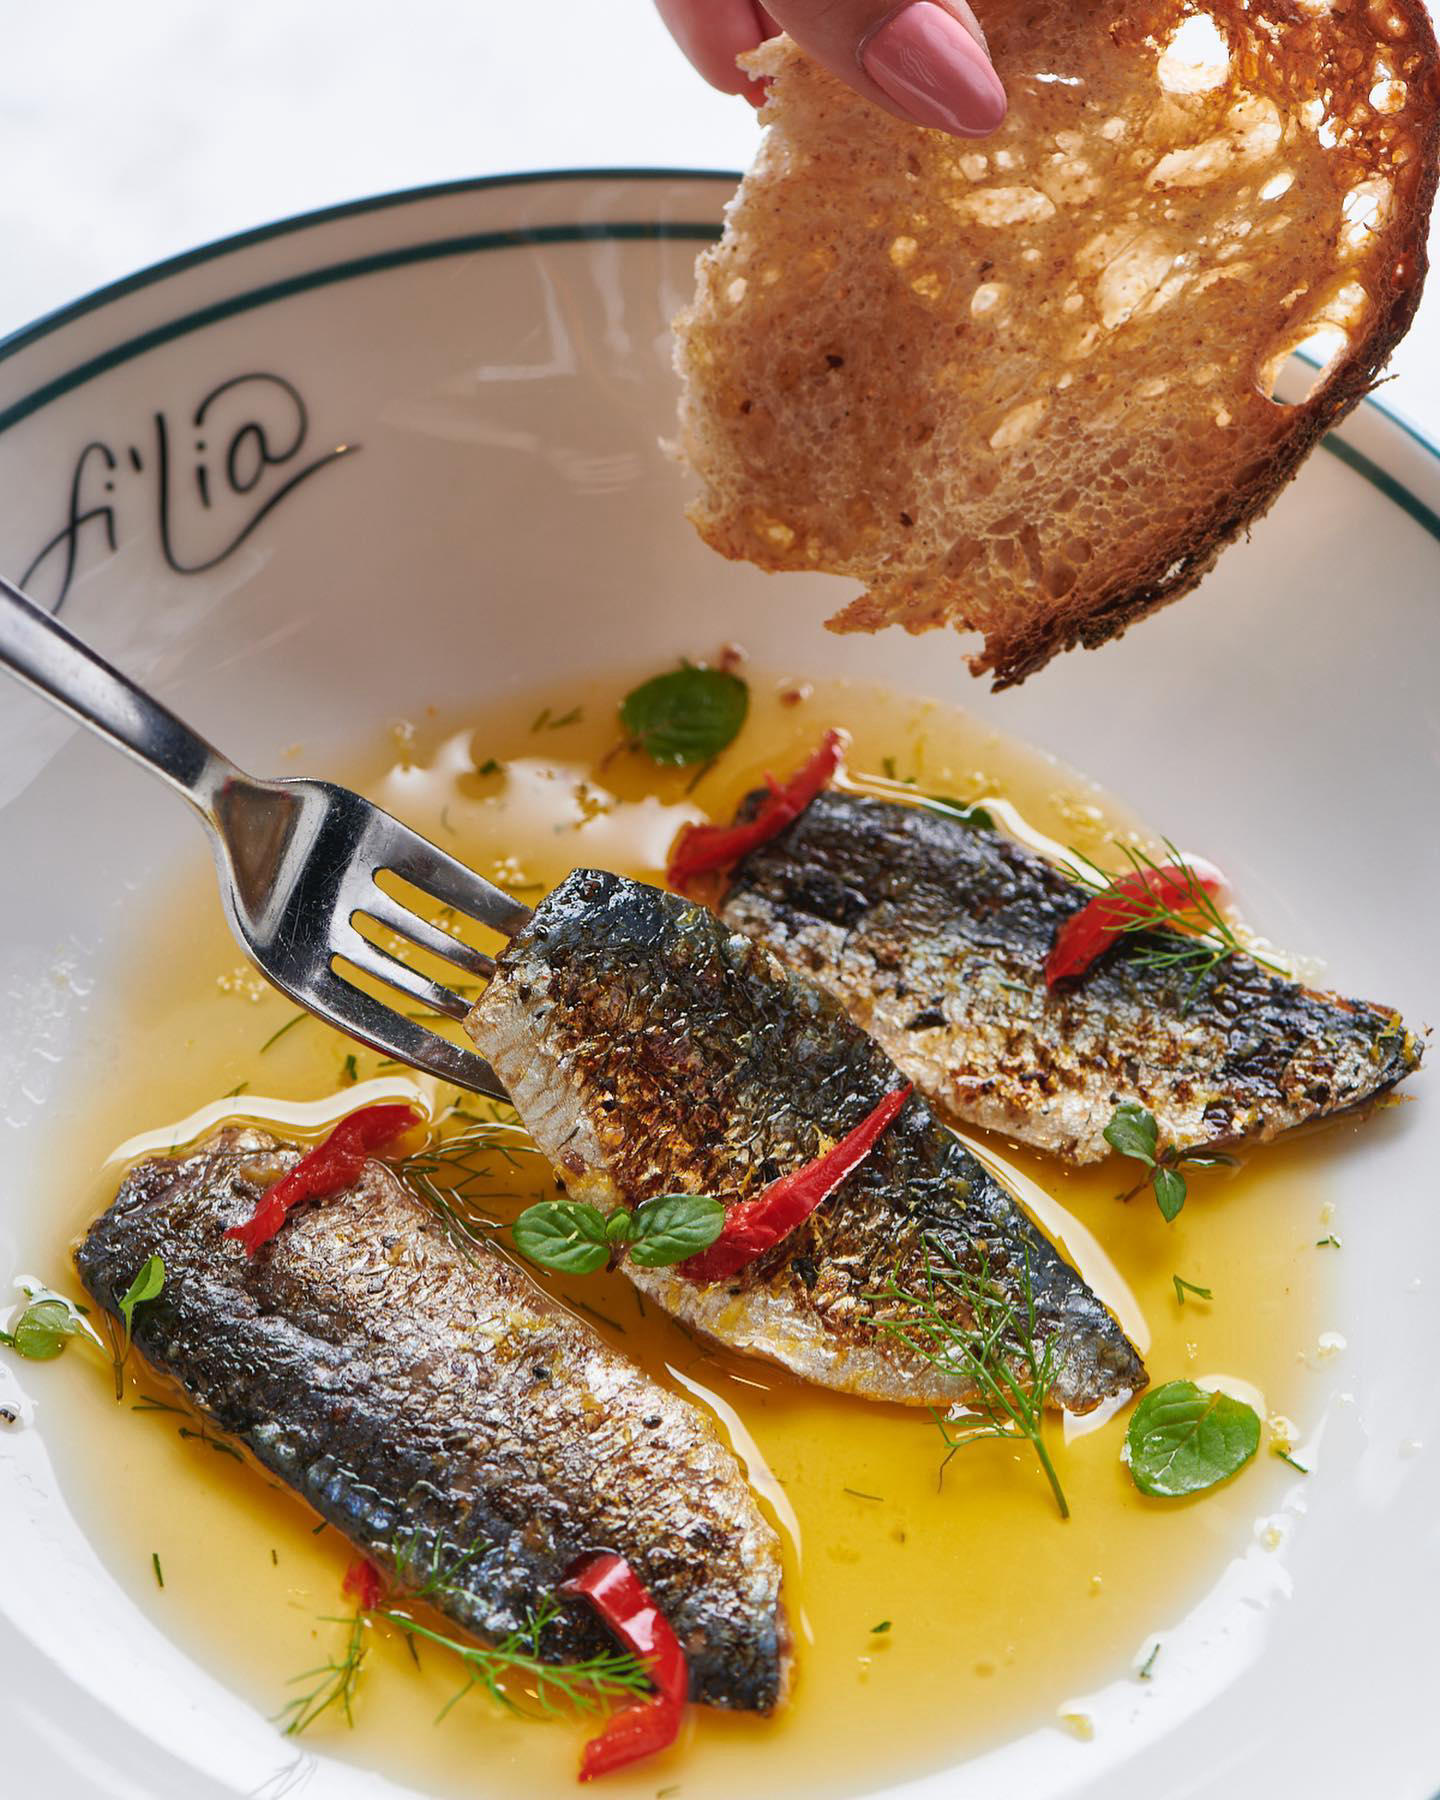 Fi’lia restaurant at SLS Dubai - There’s nothing better than dipping freshly made bread in butter